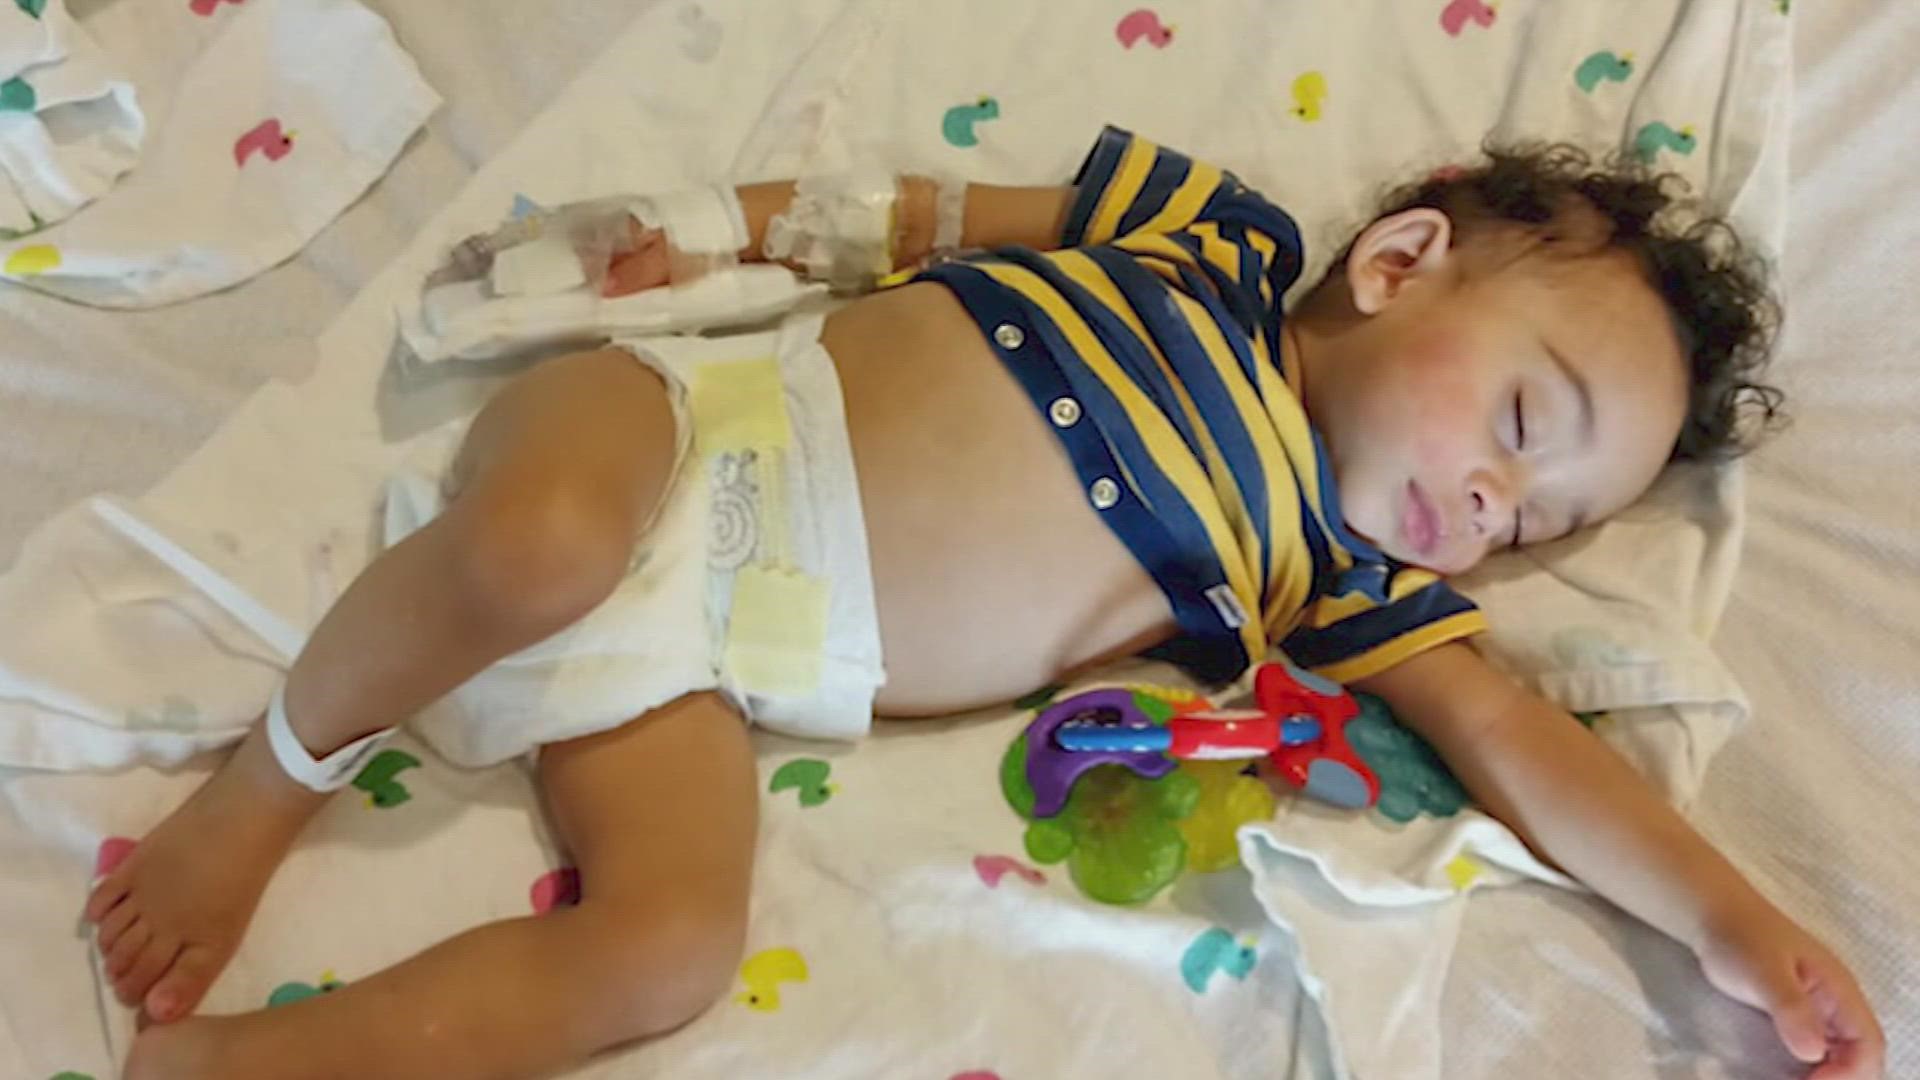 Mom Breanna Cook said her 10-month-old son could barely breathe after being diagnosed with RSV.